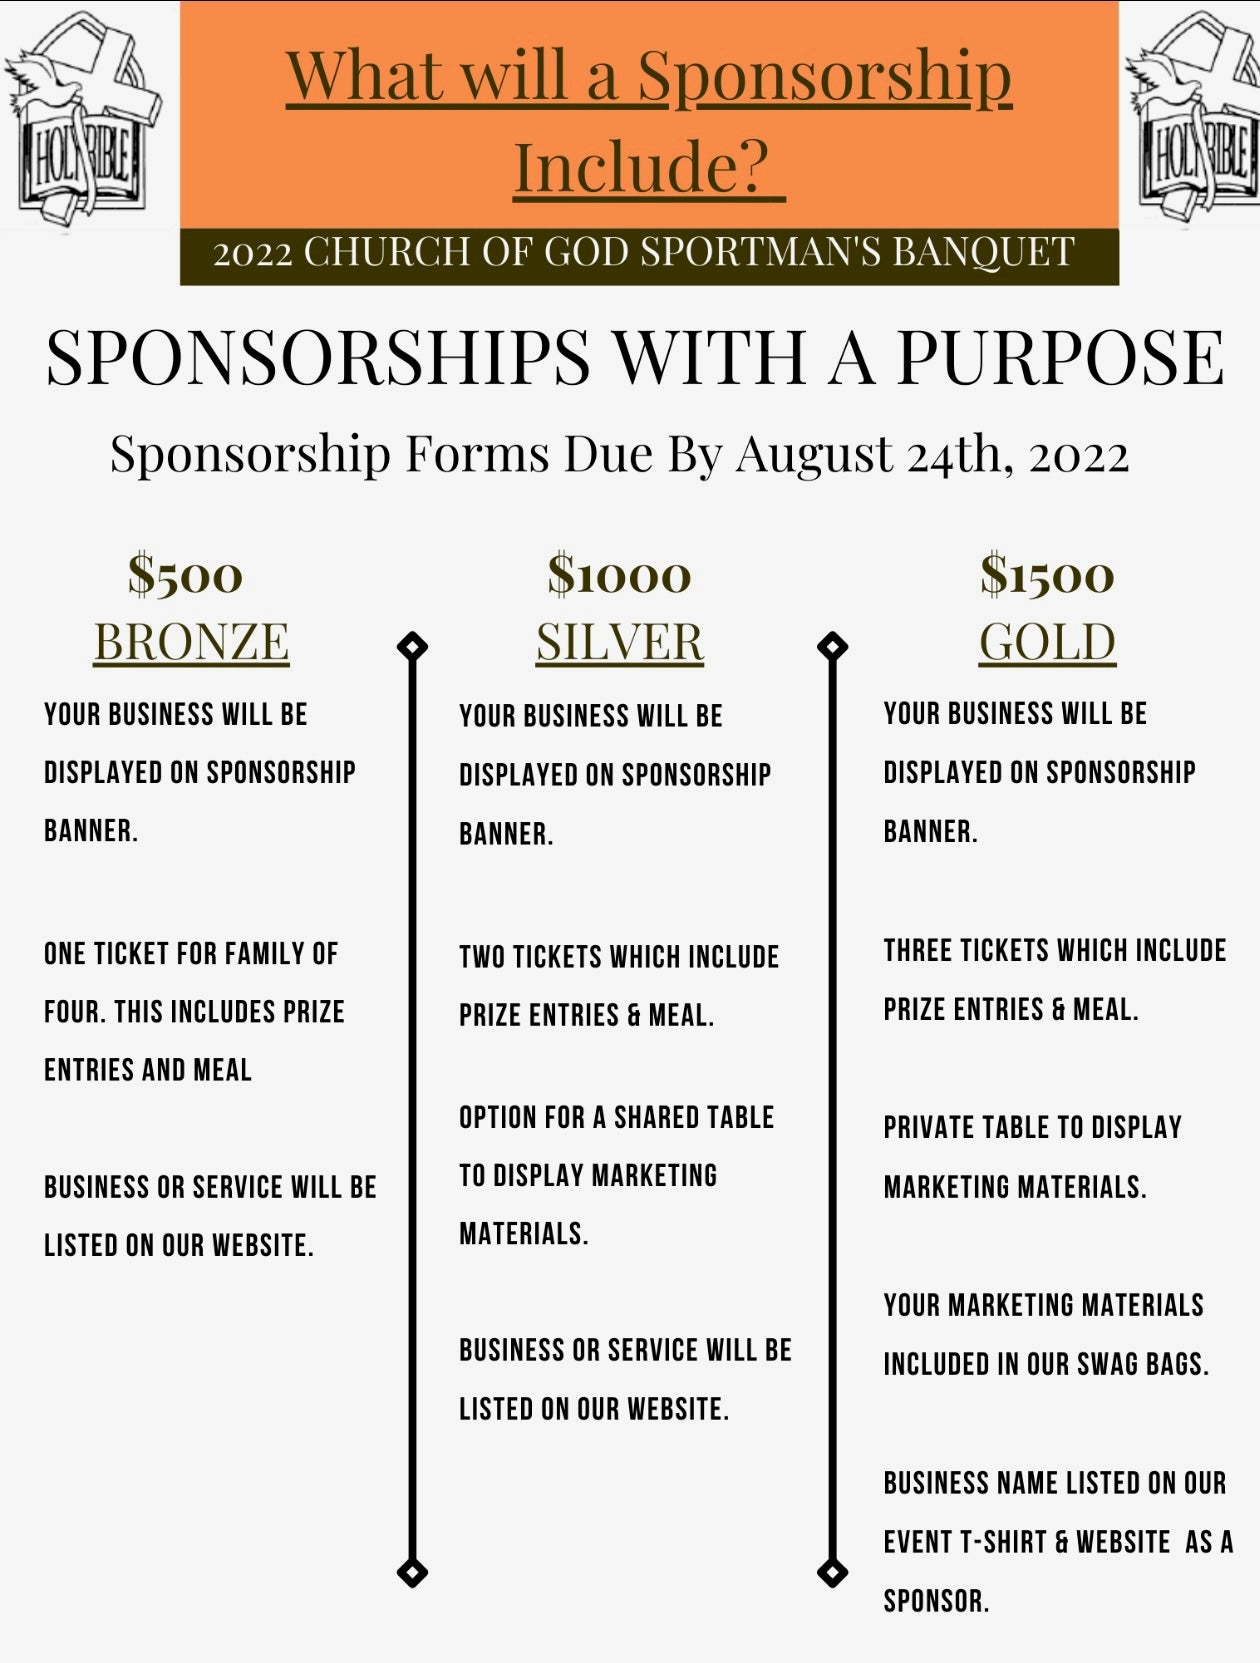 $500 Bronze Sponsorship Package - Please print your receipt and bring to event